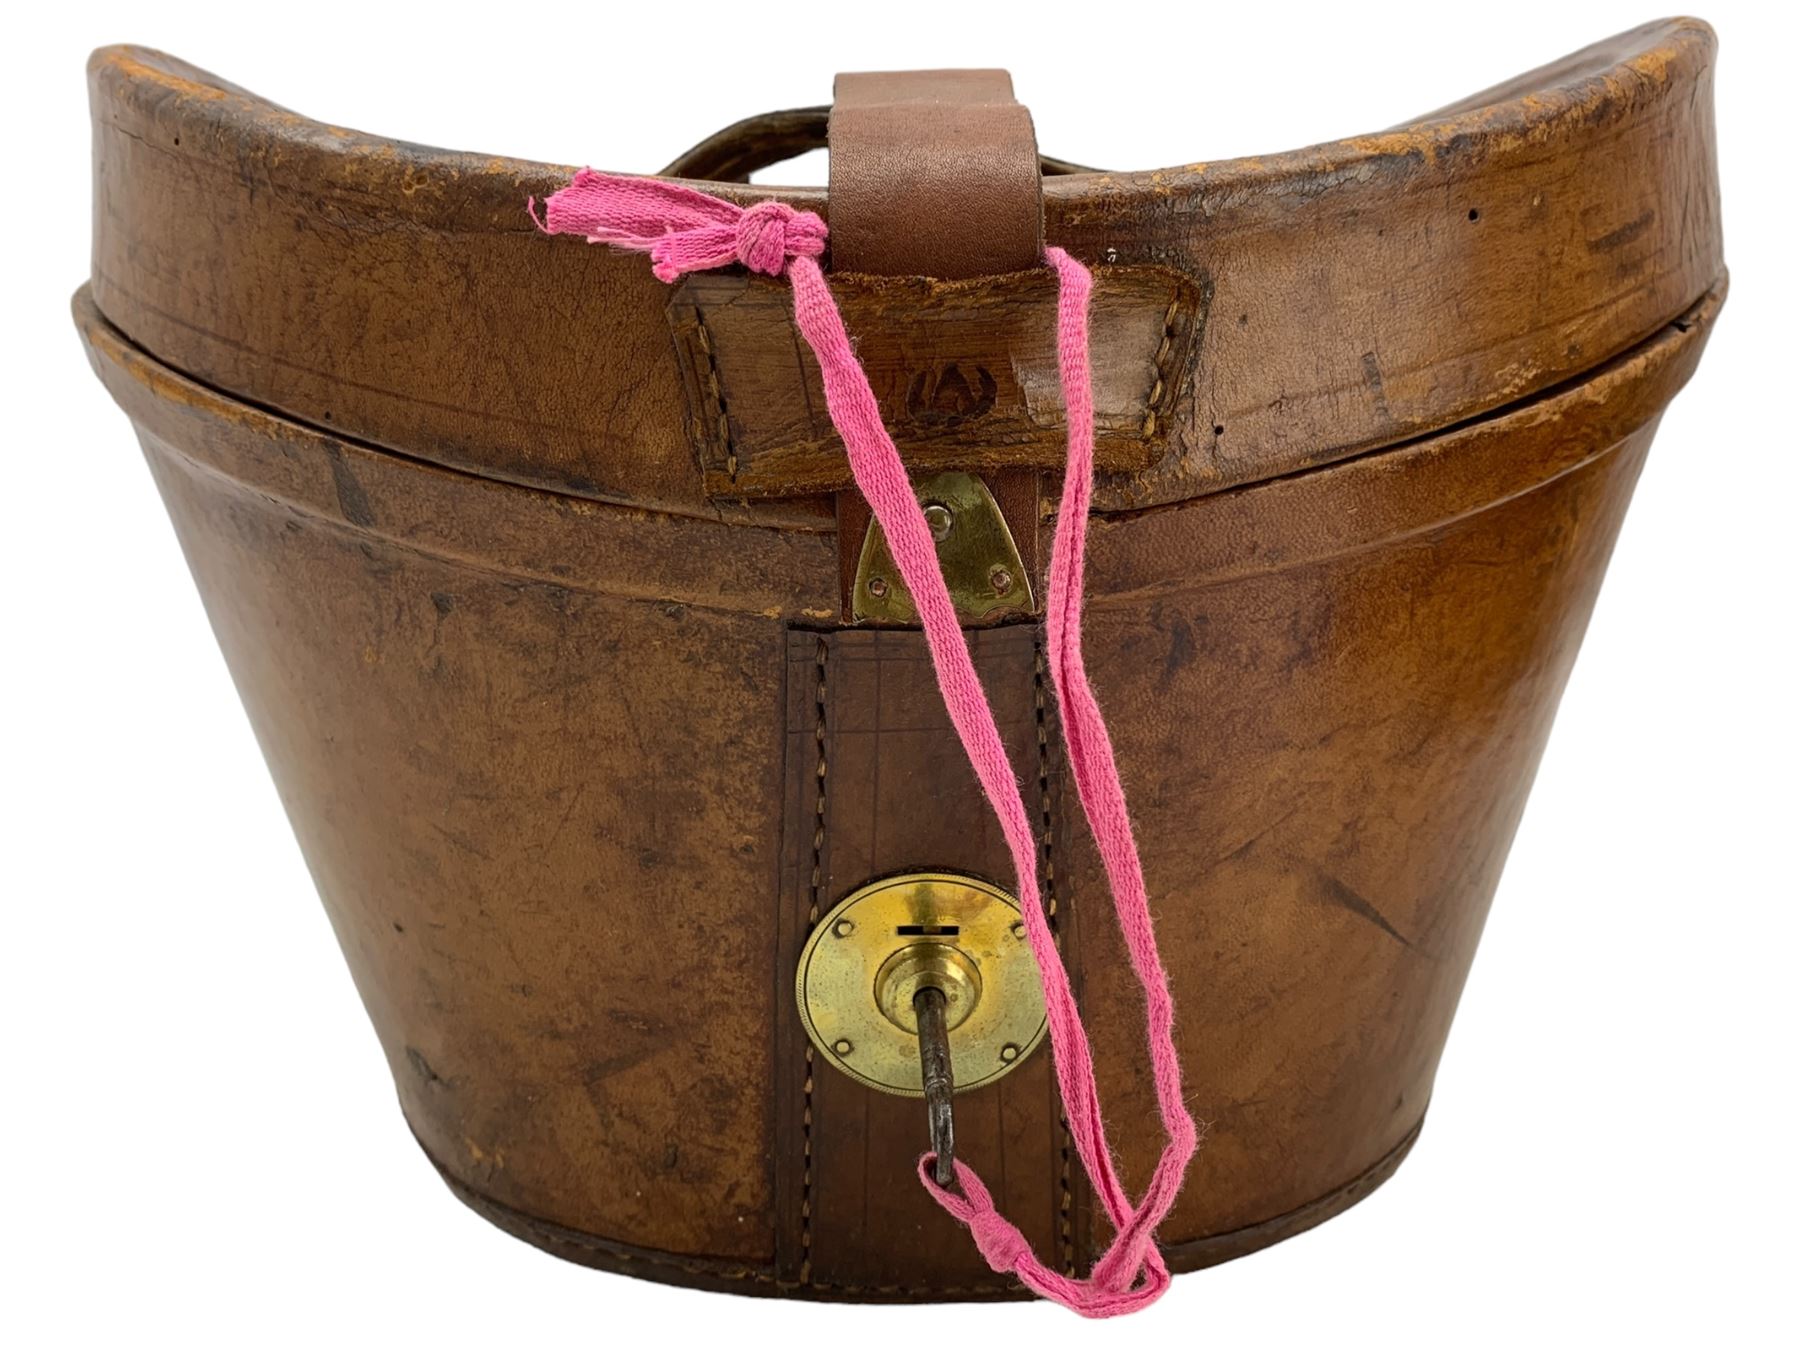 Lock & Co. top hat in tan leather hat box with brass clasp and lock - Image 6 of 8